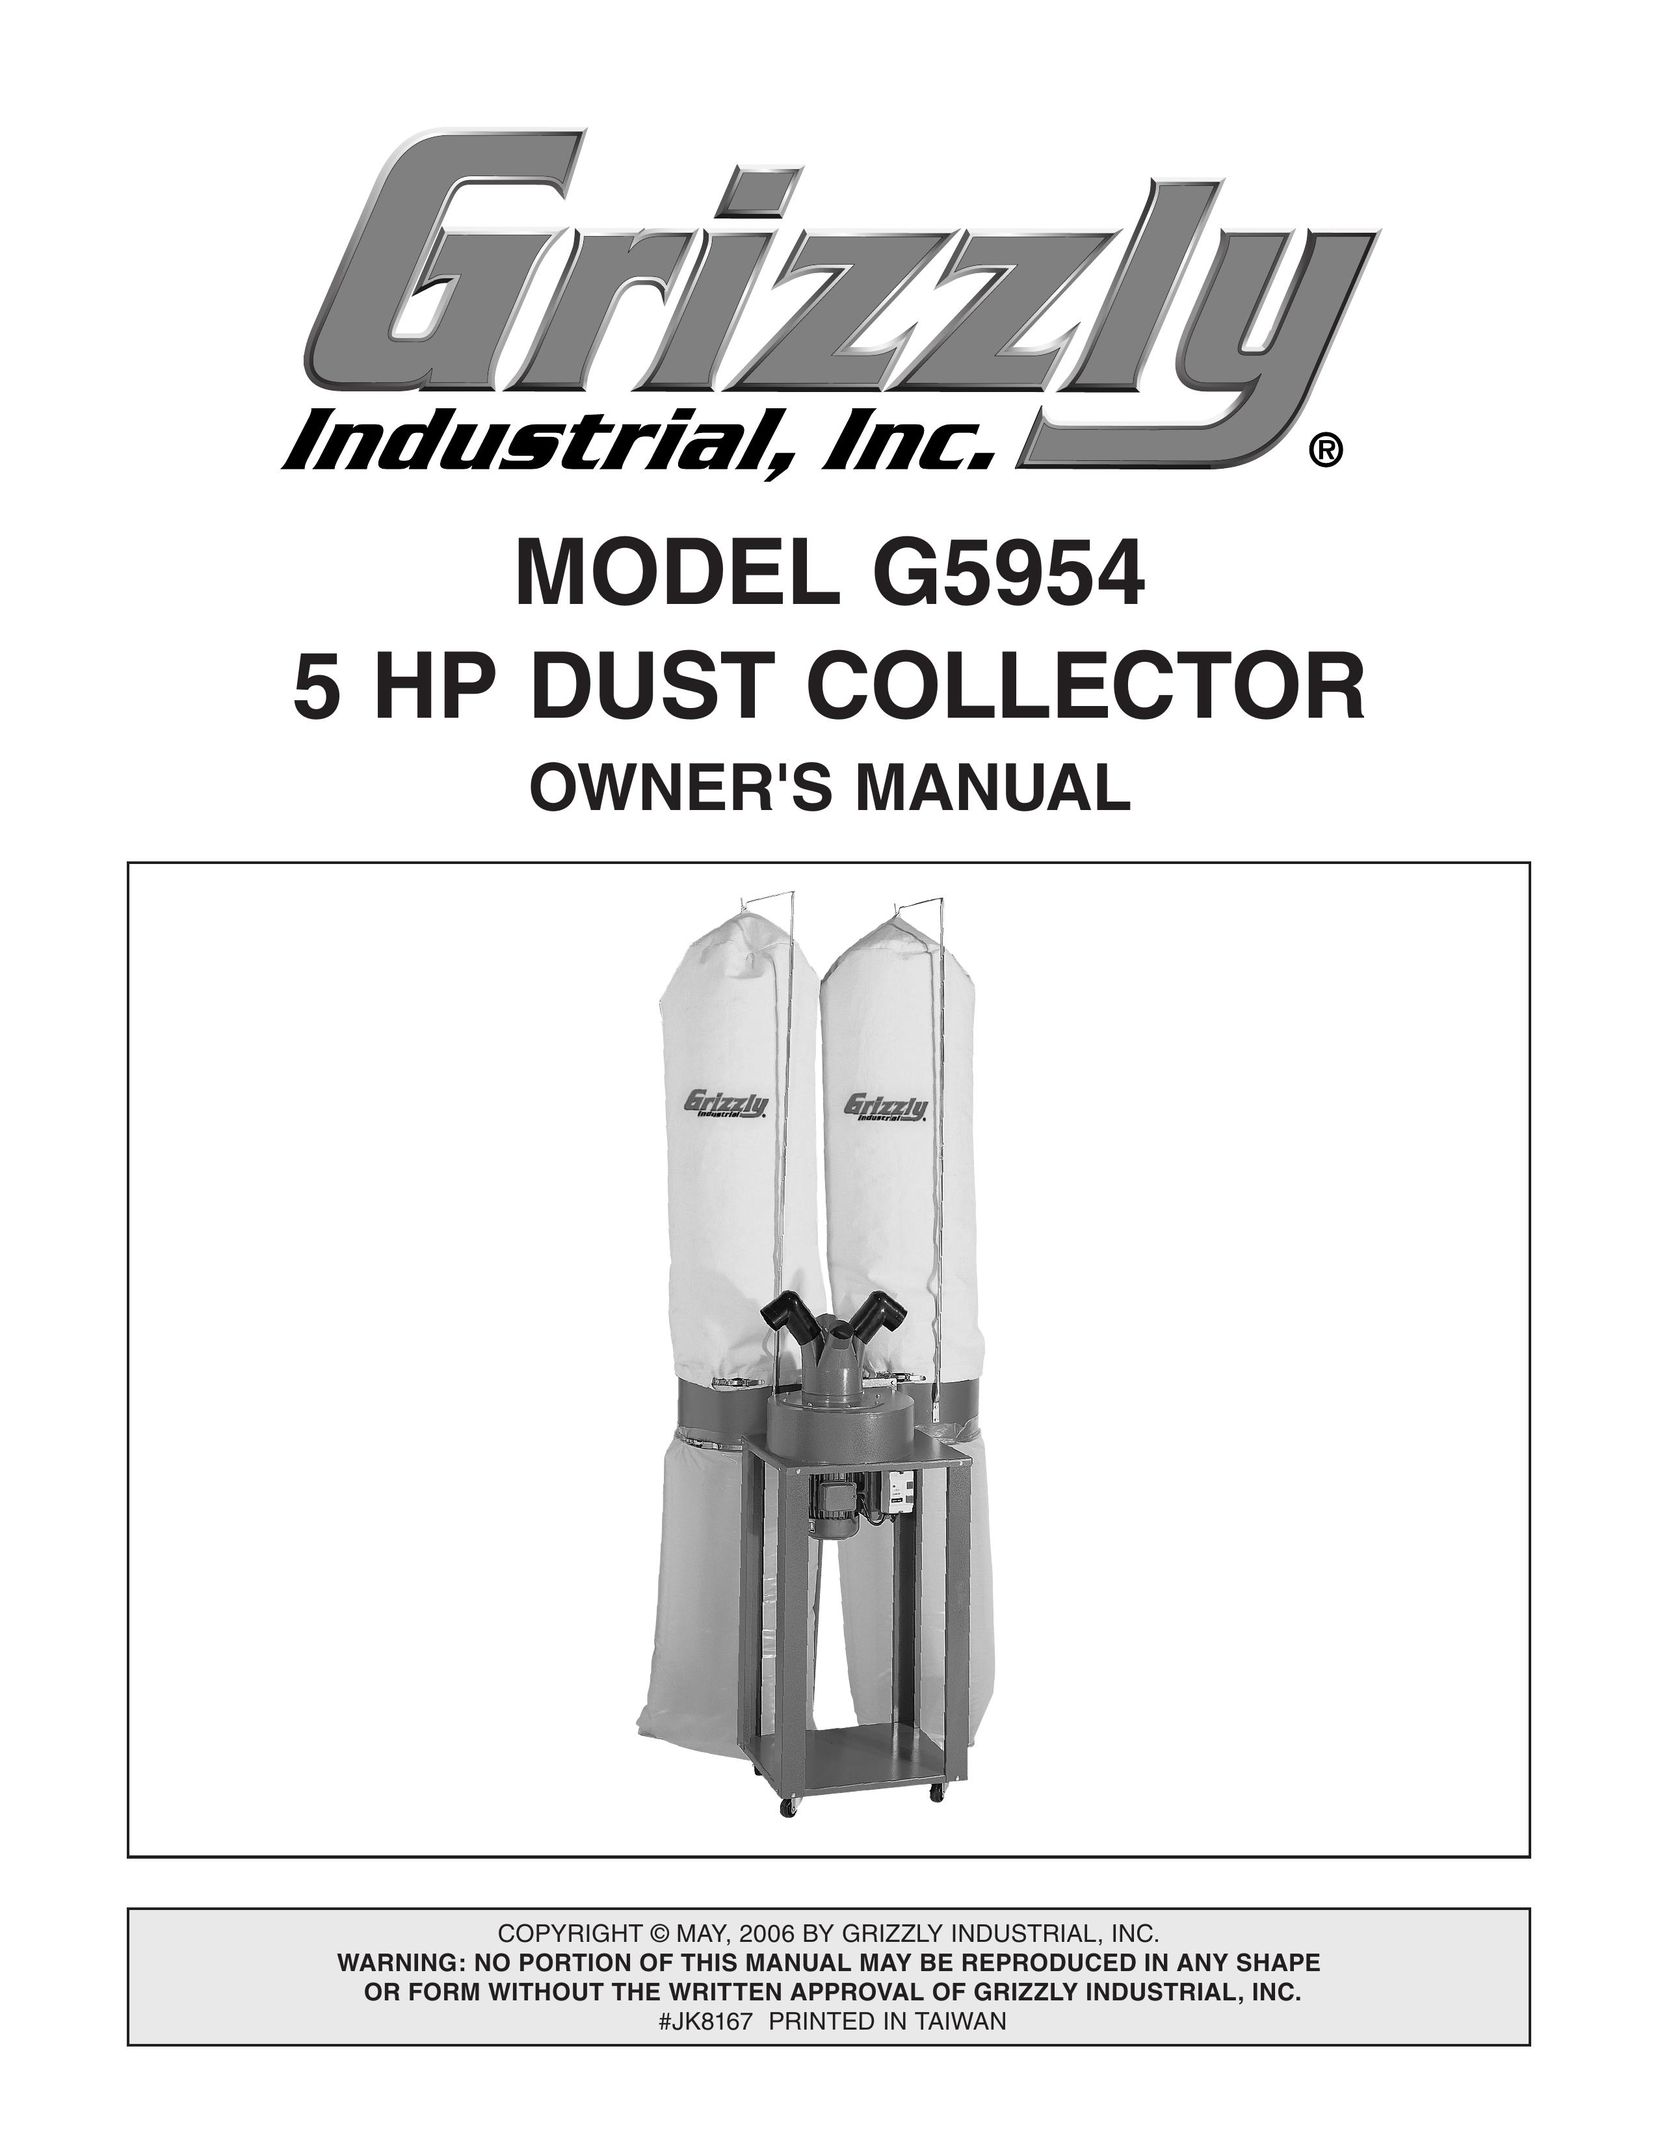 Grizzly G5954 Dust Collector User Manual